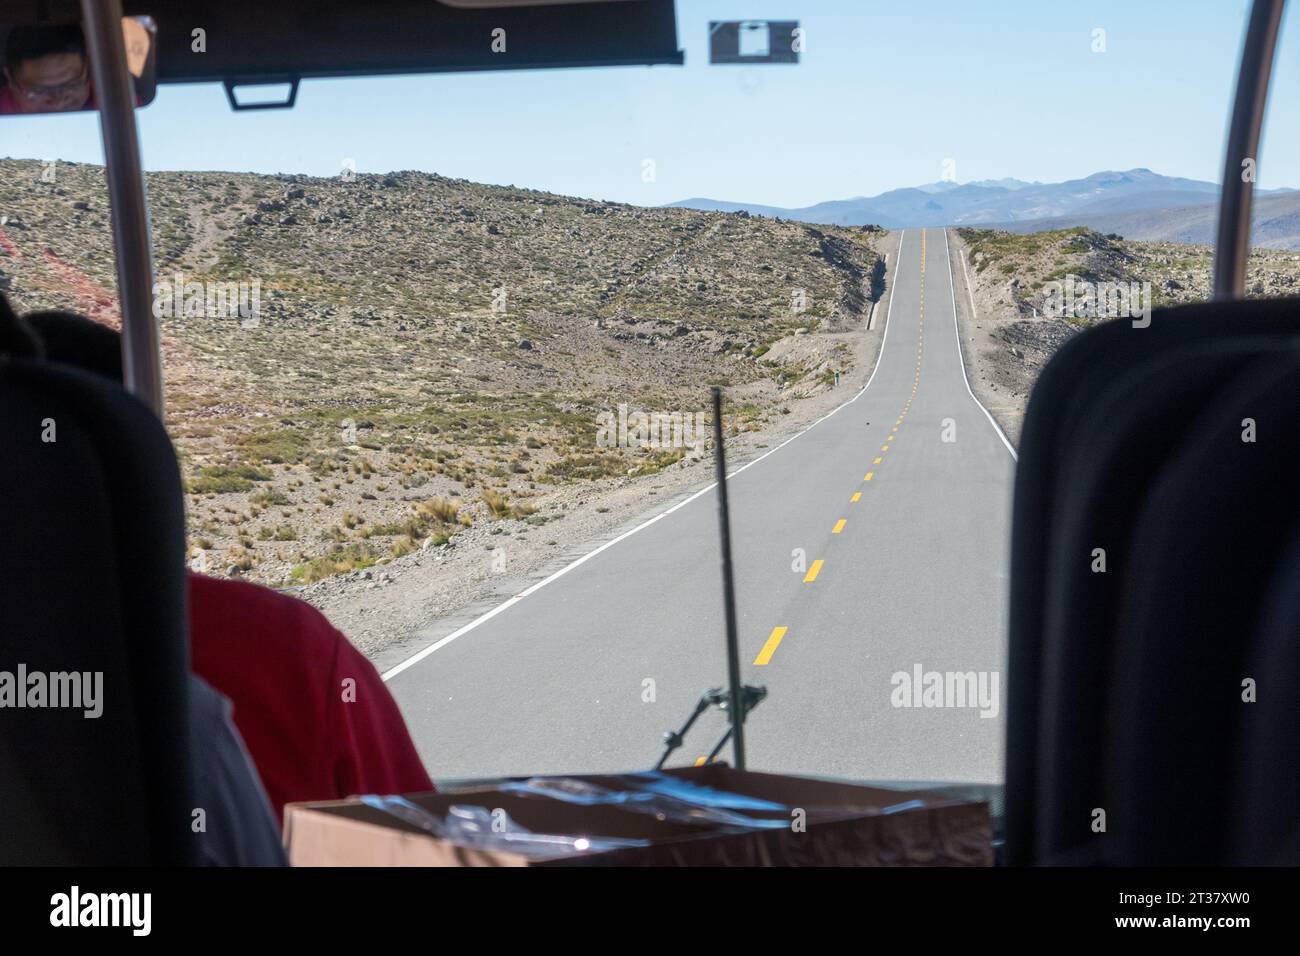 View of Andean road from Bus interior, Peru Stock Photo